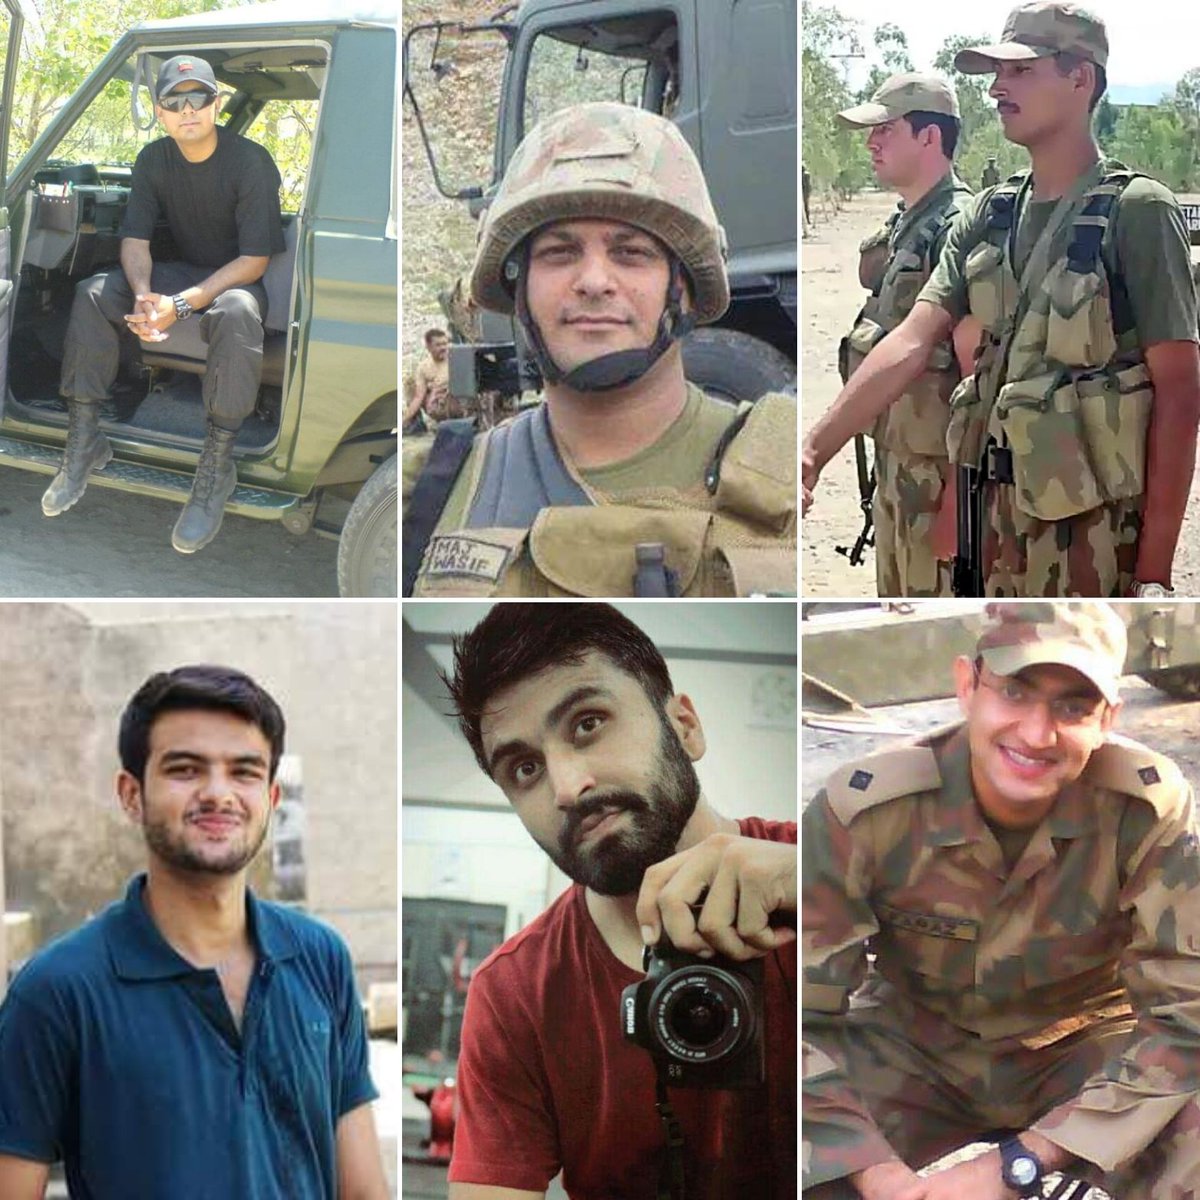 The unsung heroes who martyred in Waziristan while fighting against terrorists. We owe this peace to them.